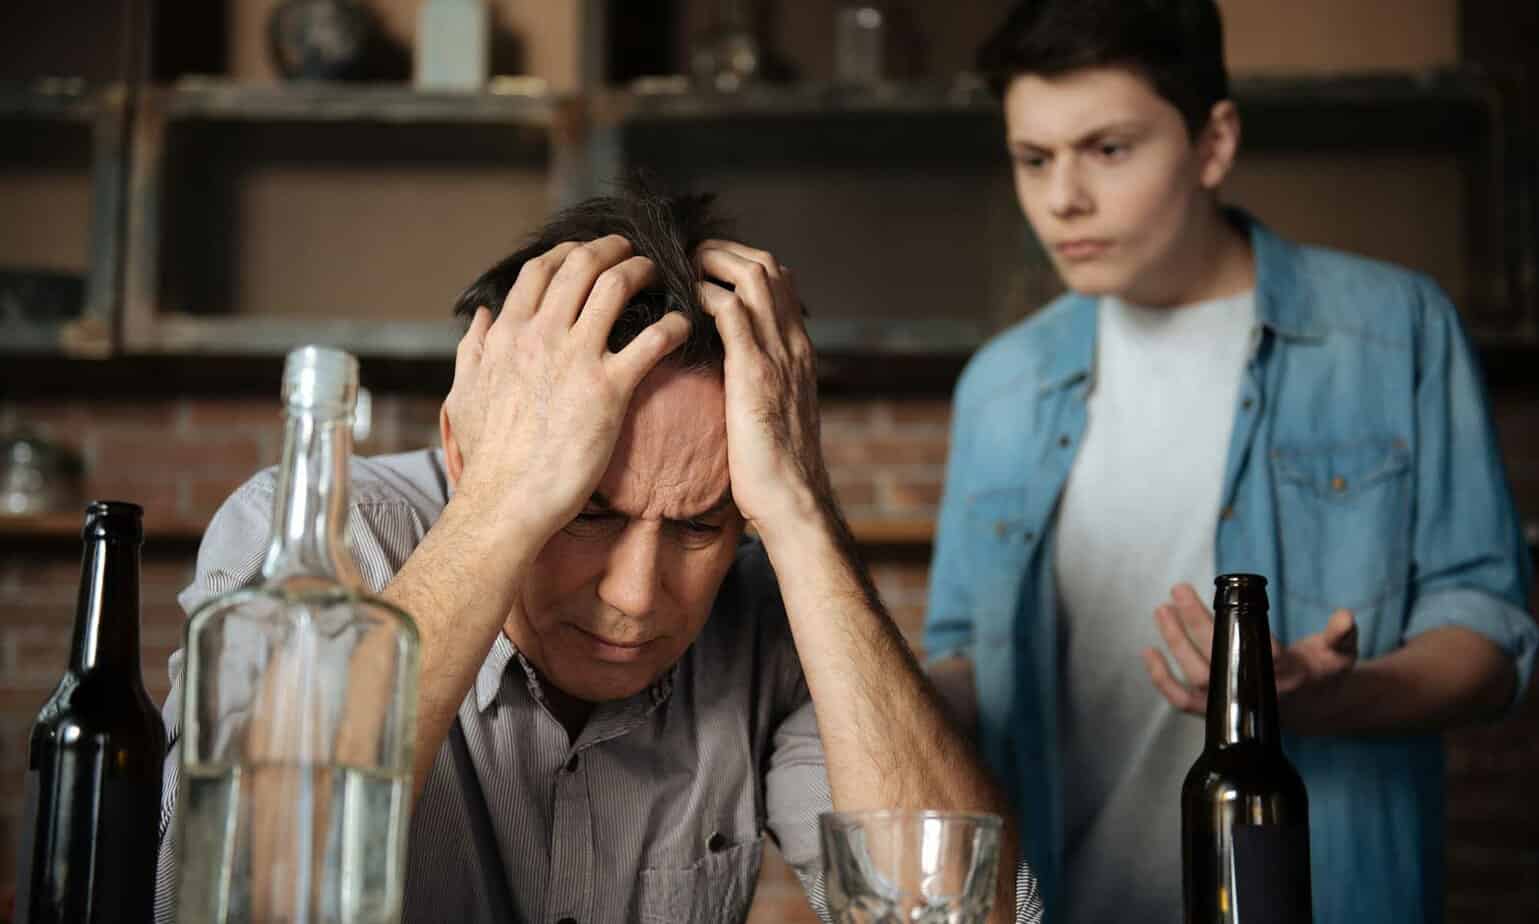 What Do I Do If My Parent Is Struggling with Addiction?